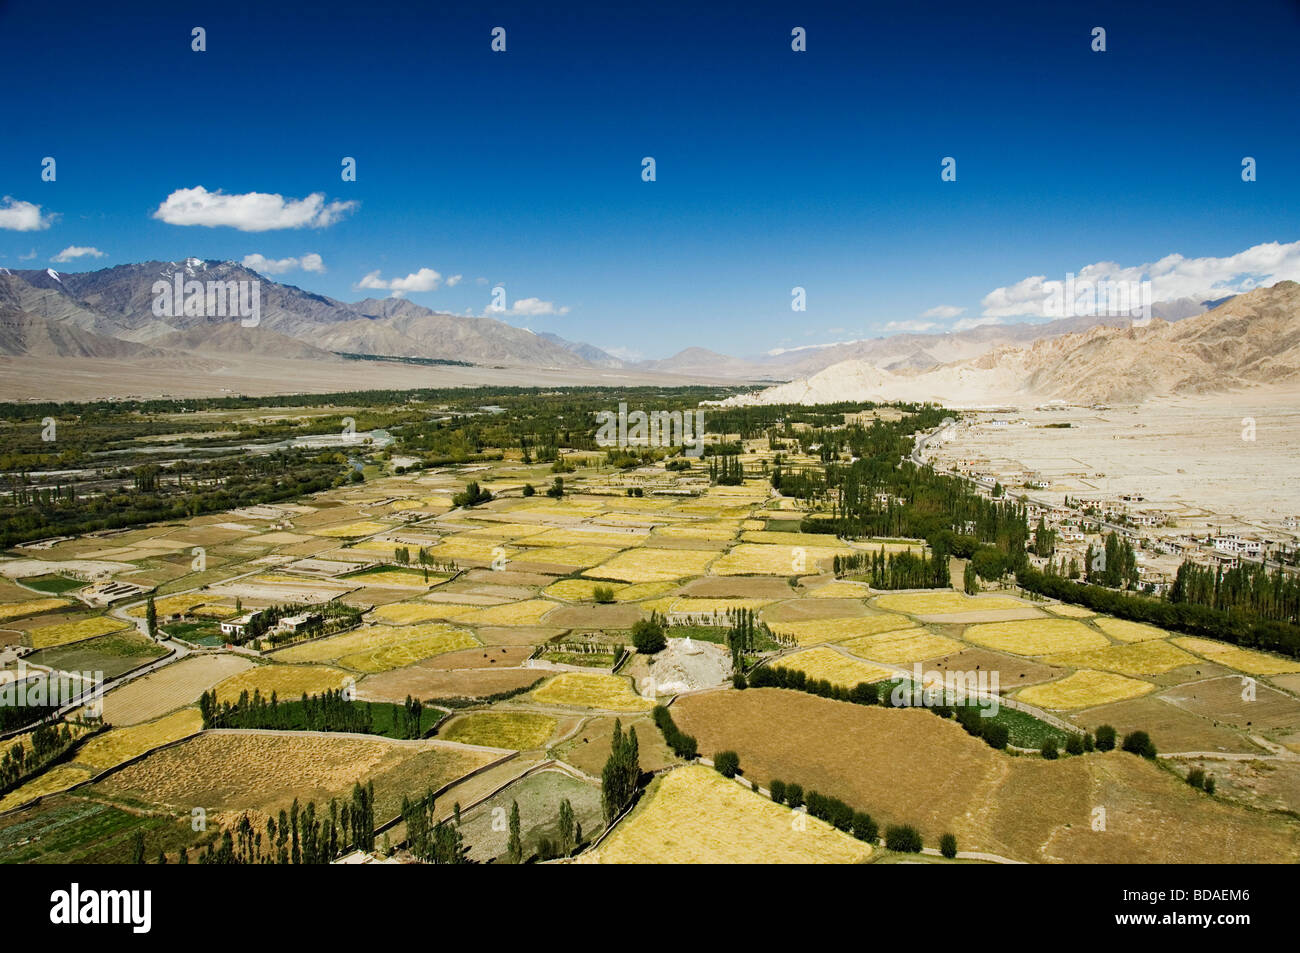 Panoramic view of a landscape, Ladakh, Jammu and Kashmir, India Stock Photo